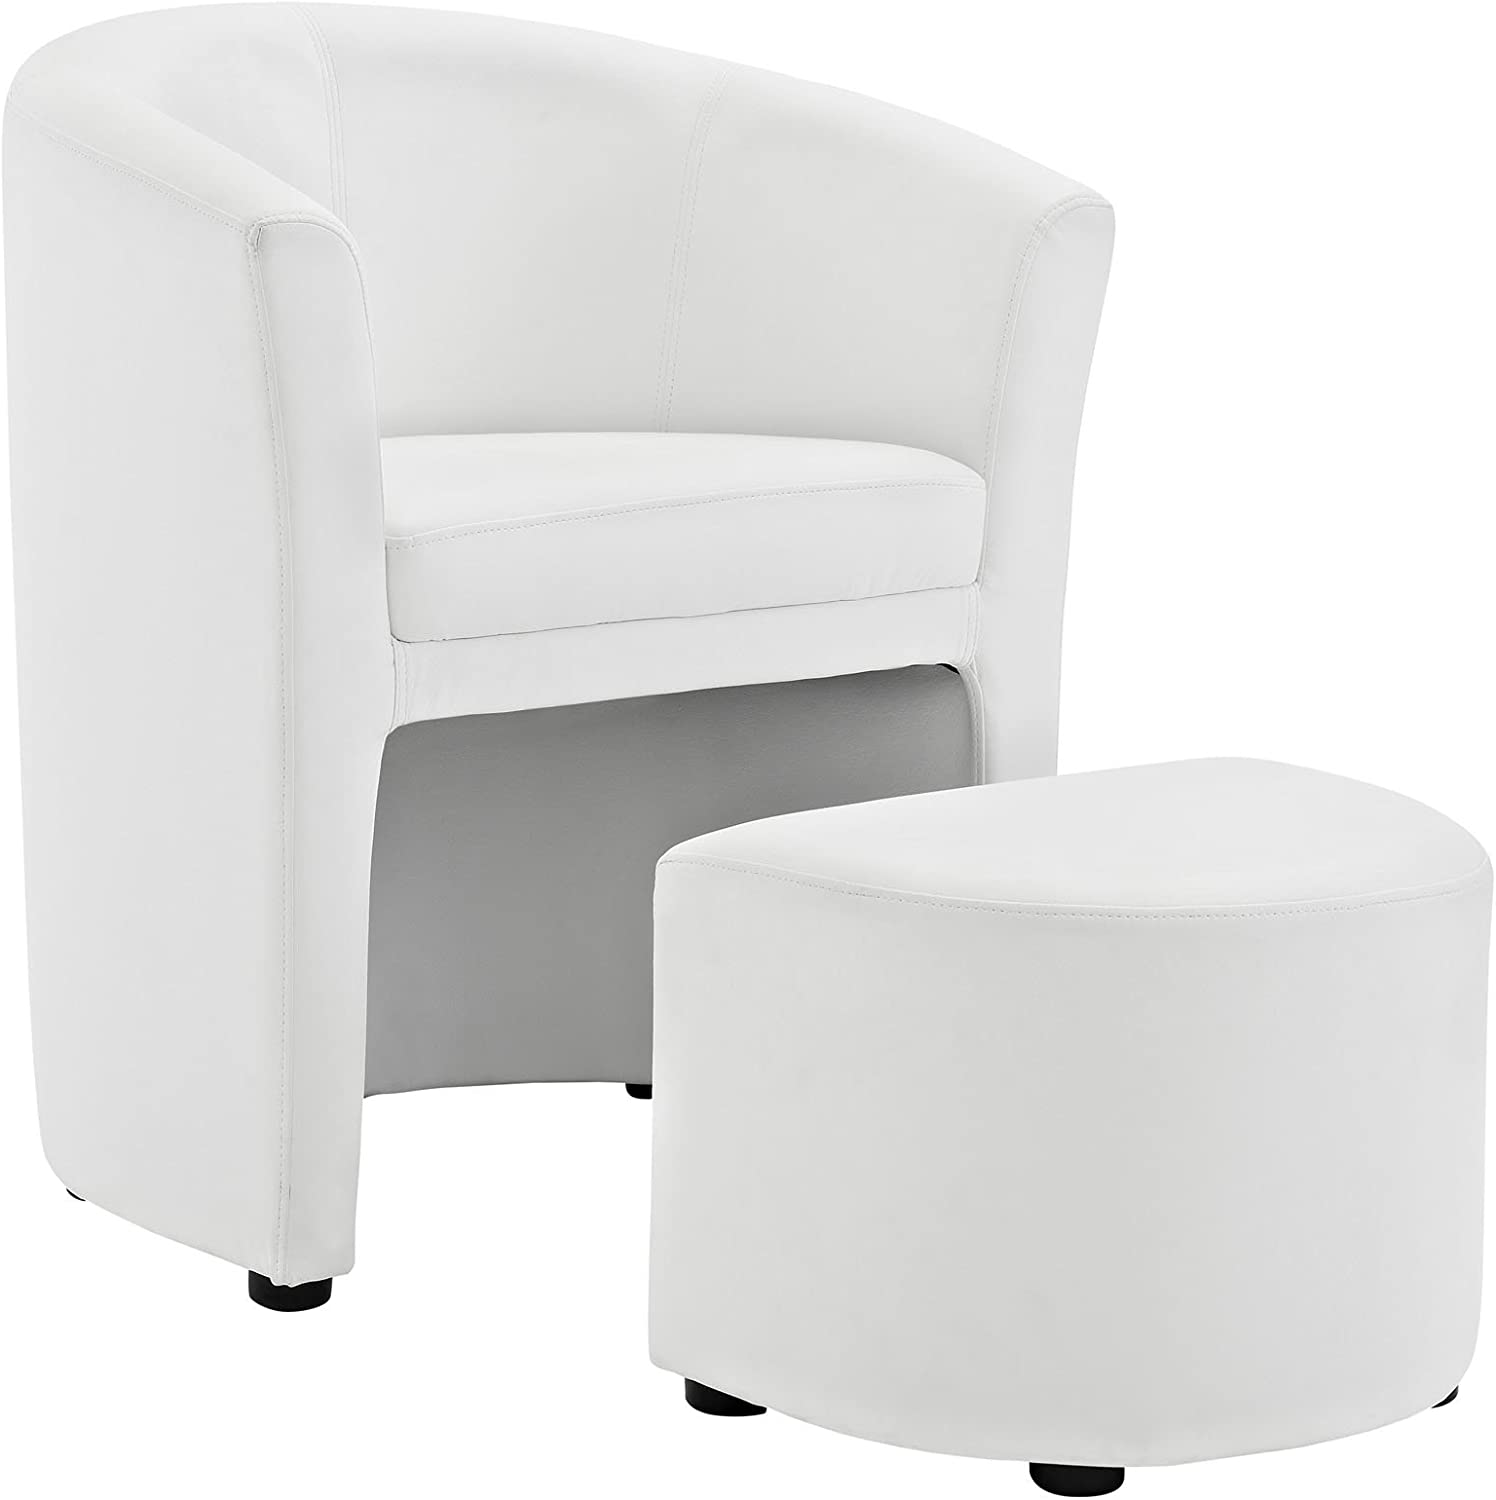 Modway Divulge Faux Leather Armchair and Ottoman Set in White